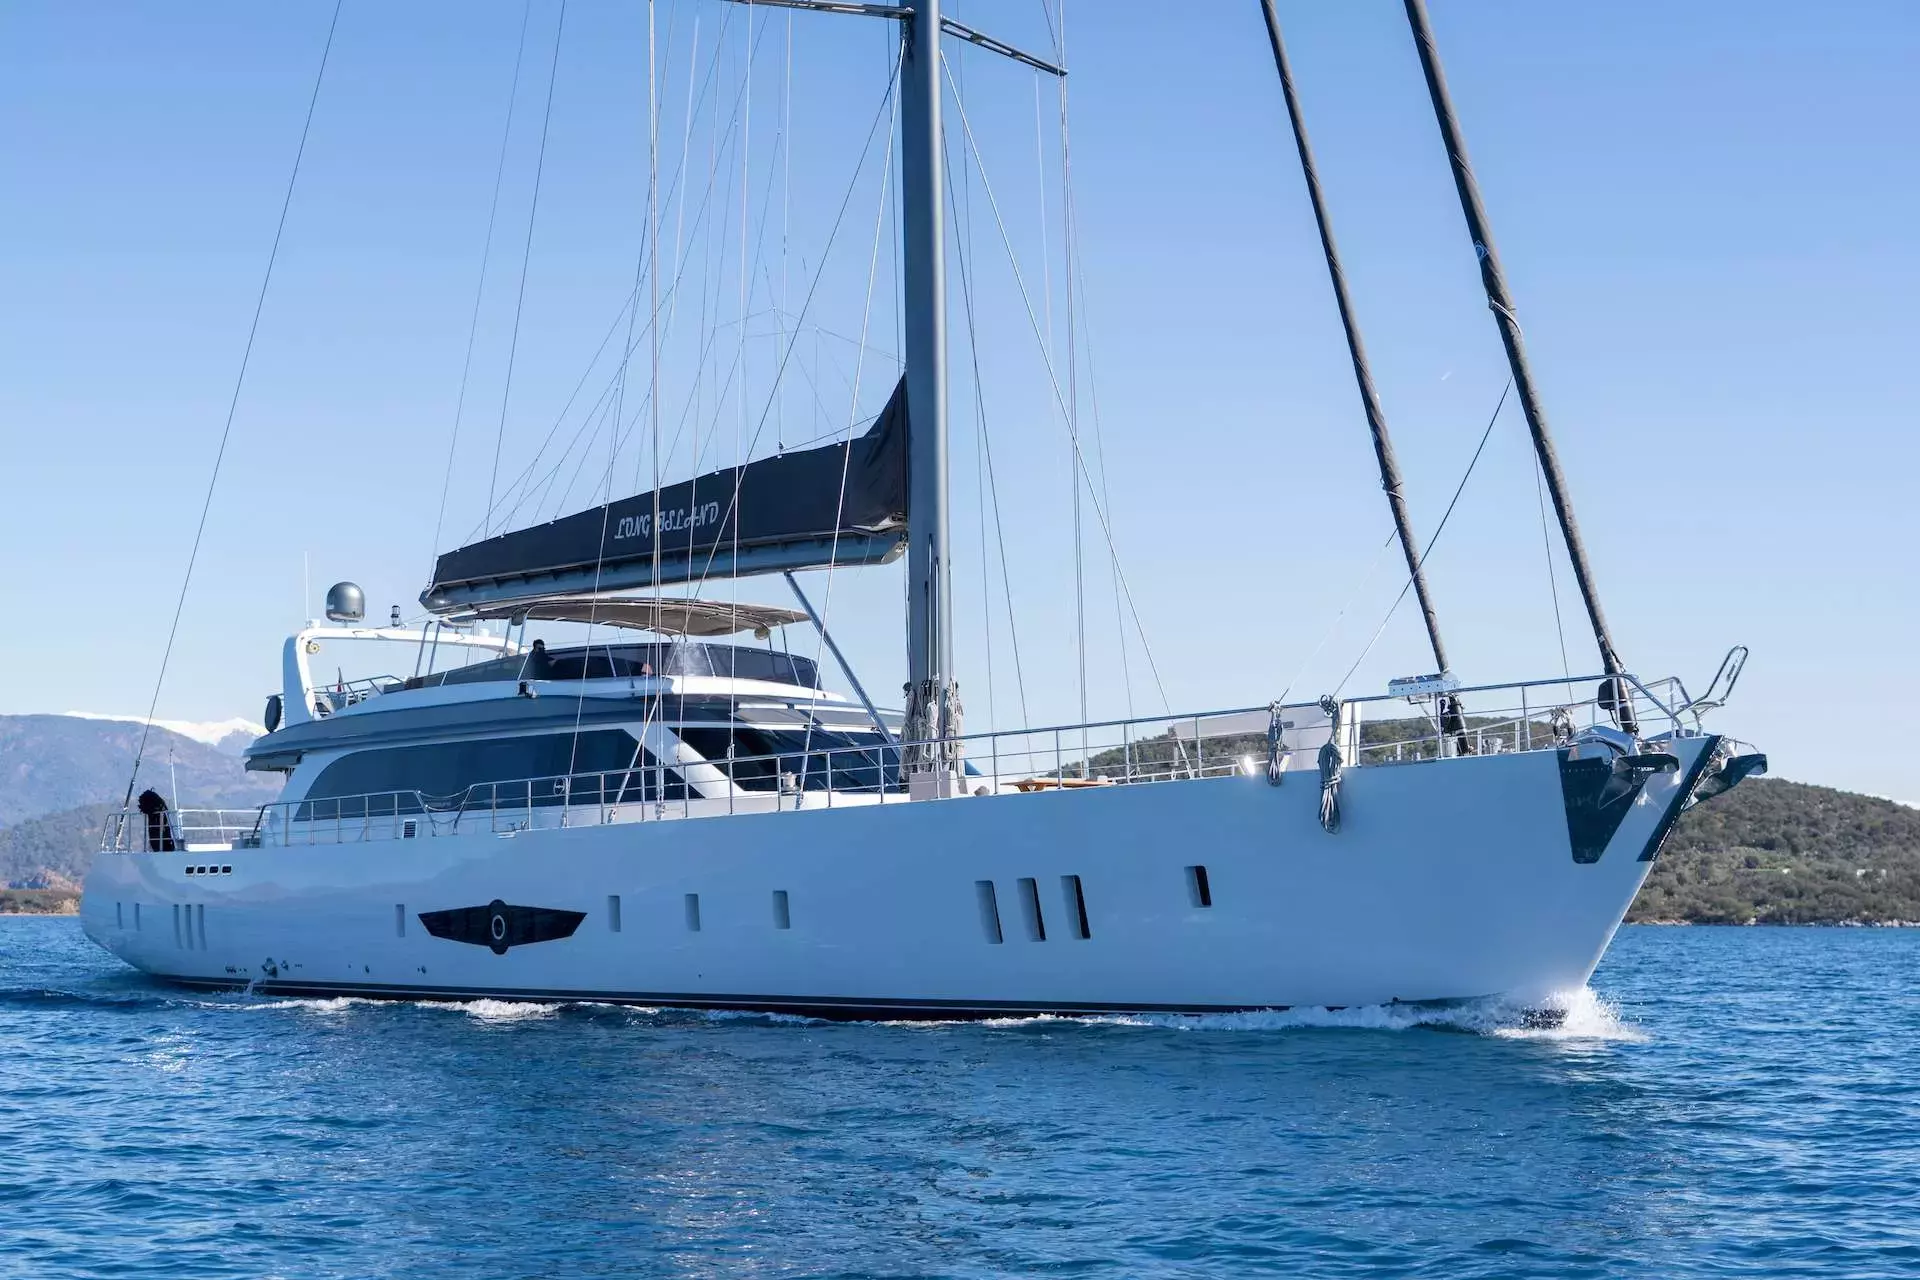 Long Island by Fethiye Shipyard - Top rates for a Charter of a private Motor Sailer in Turkey